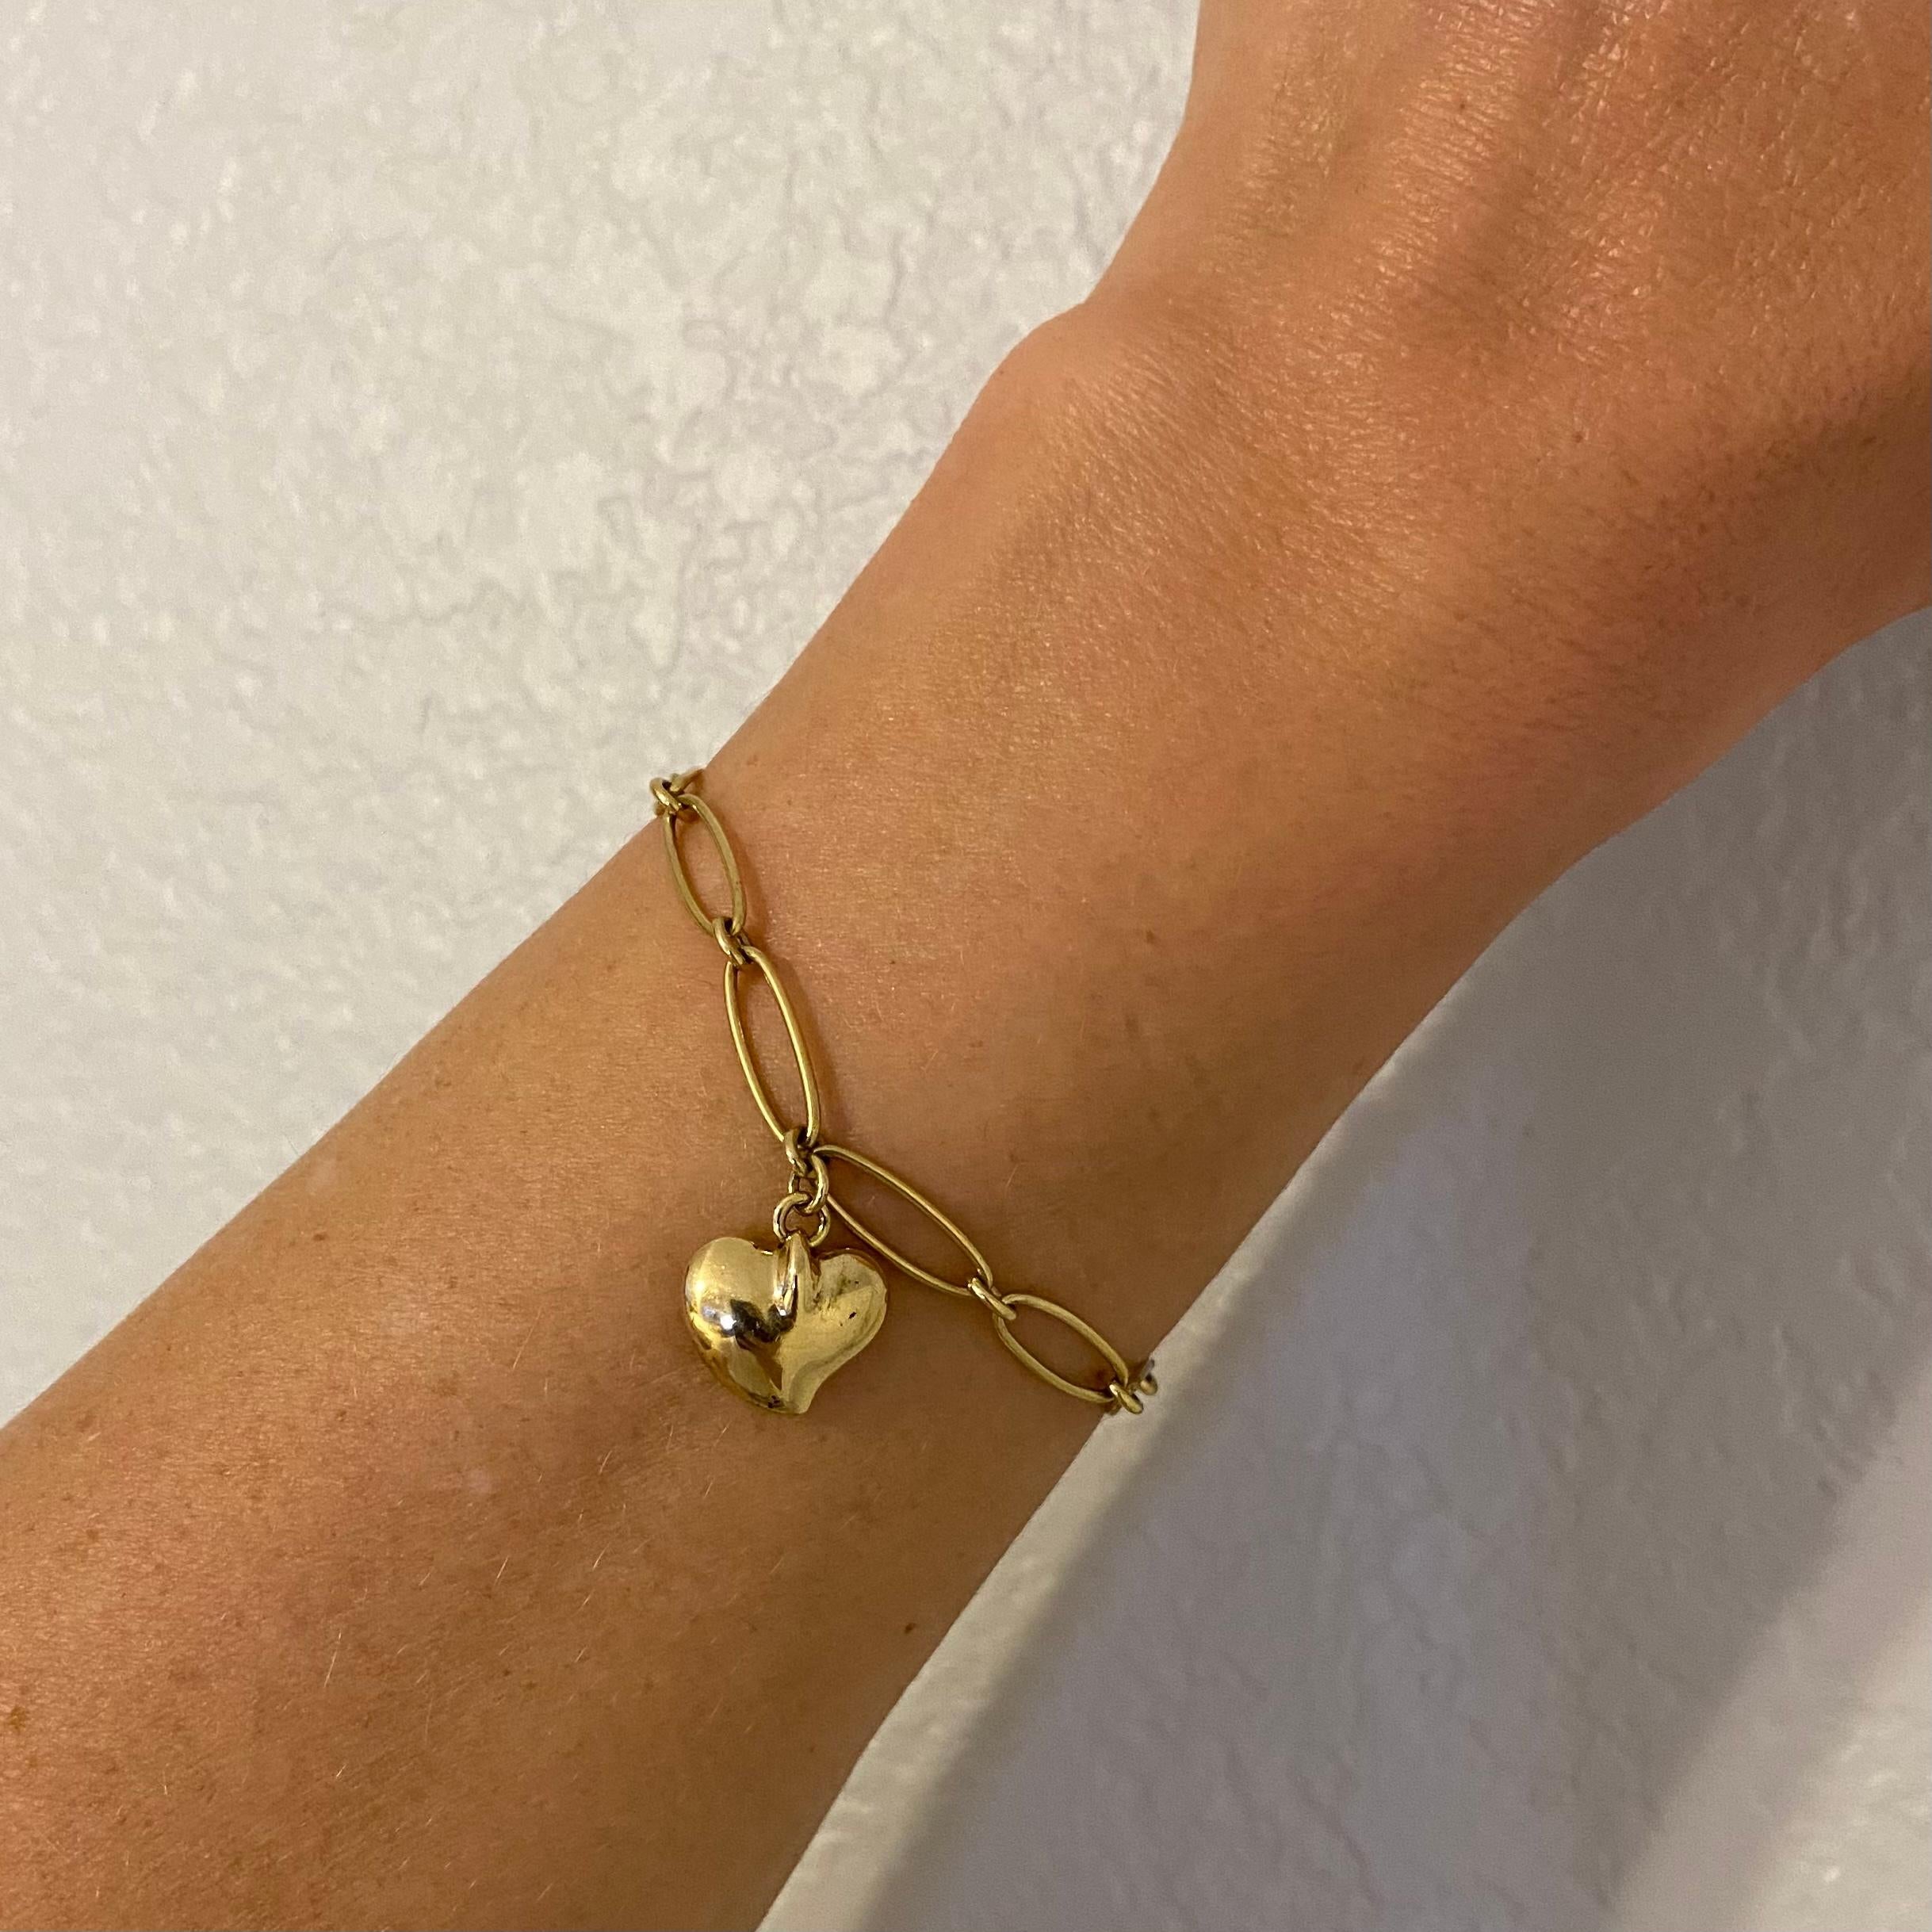 Iconic TIFFANY & CO Elsa Peretti 18K Yellow Gold open Link Bracelet, suspending a Heart Charm. Marked:  Tiffany & Co. 750 and signed: Elsa Peretti SPAIN. Measuring approx. 7”l x 0.20”w. For that Special Someone…including you! 